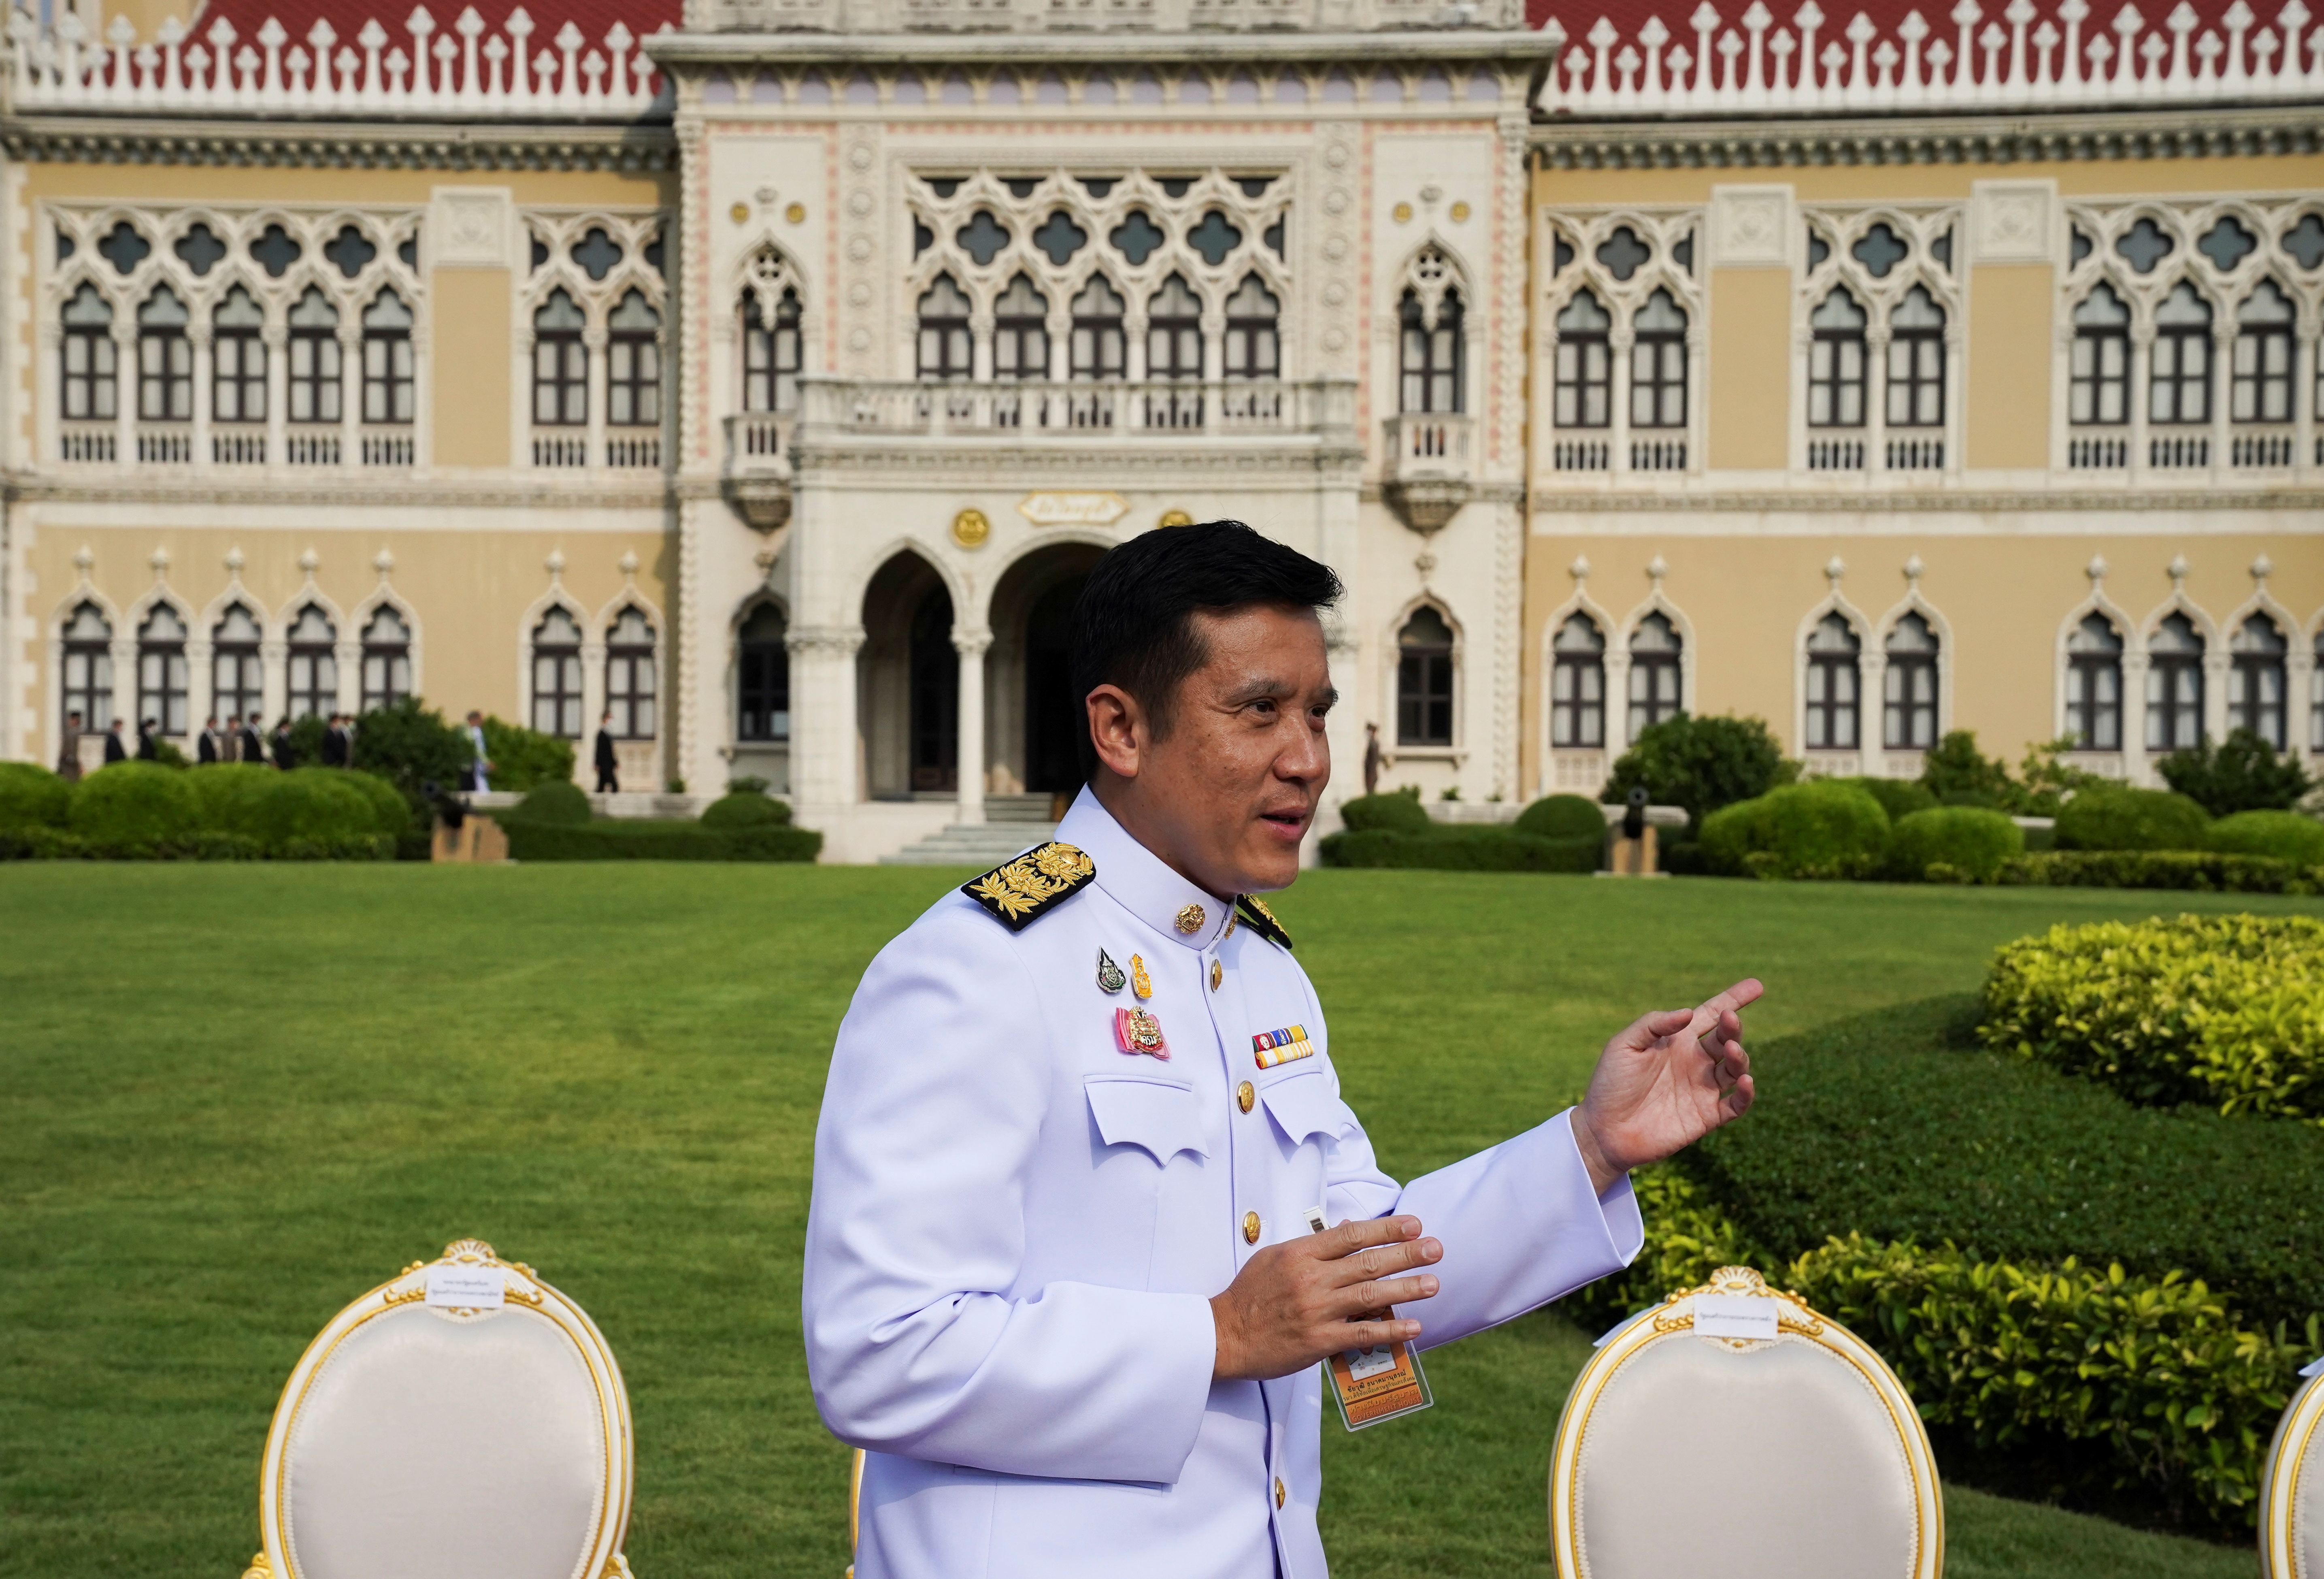 Thailand's Minister of Digital Economy and Society gestures after a family photo session at the Government House in Bangkok